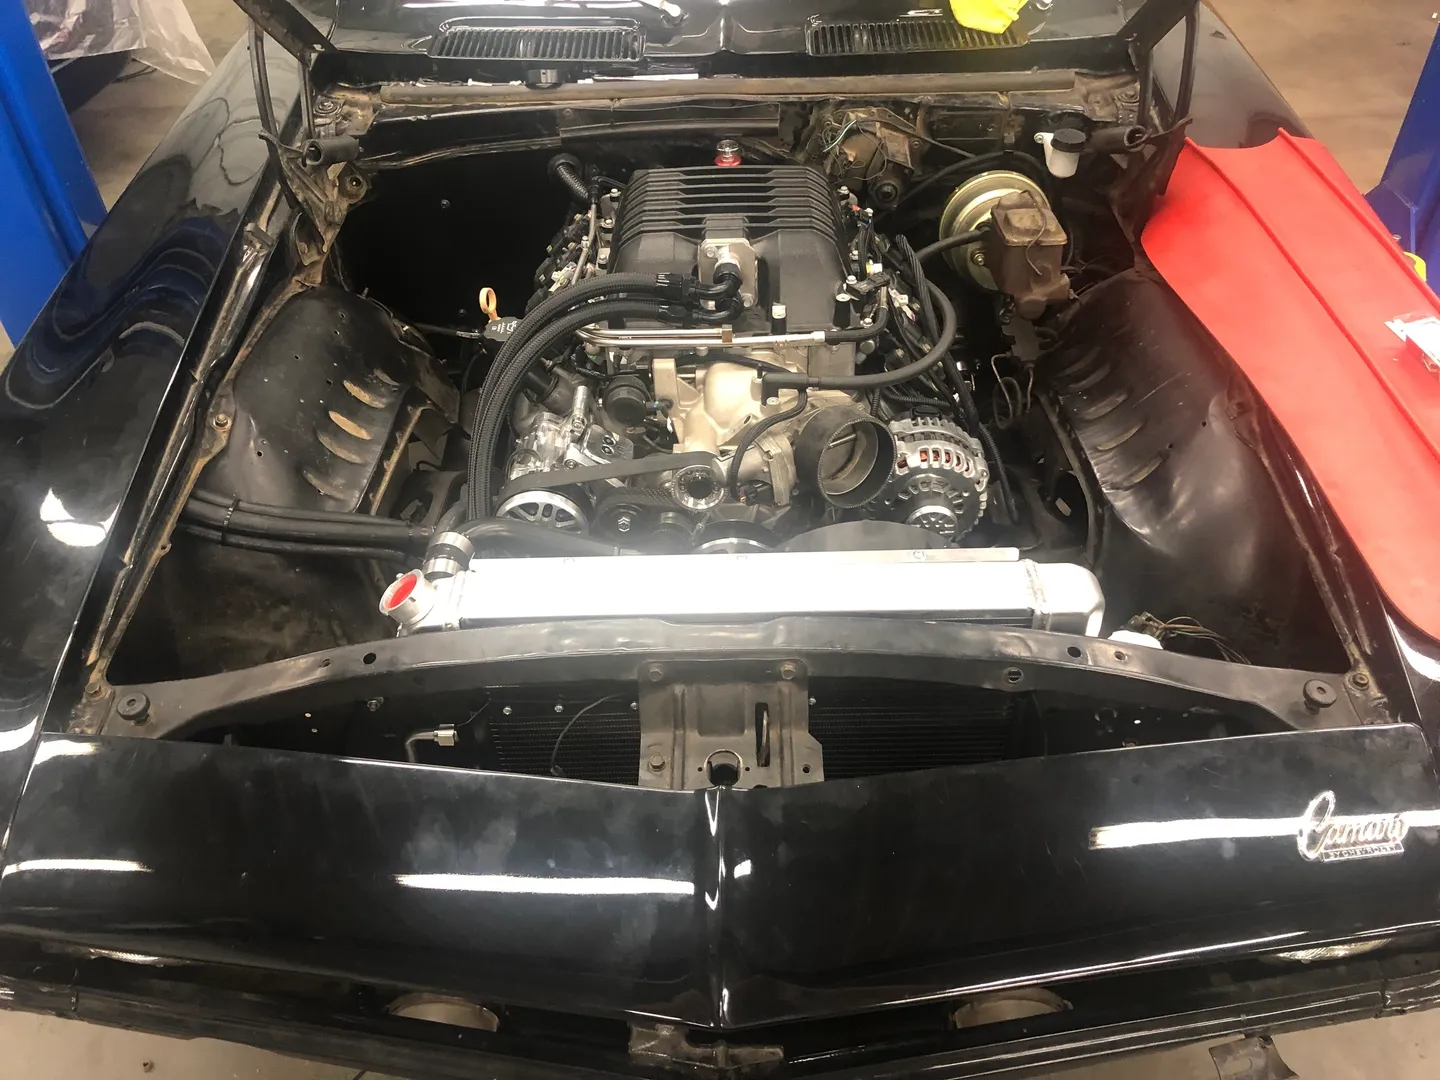 A camaro hood engine opened at the shop